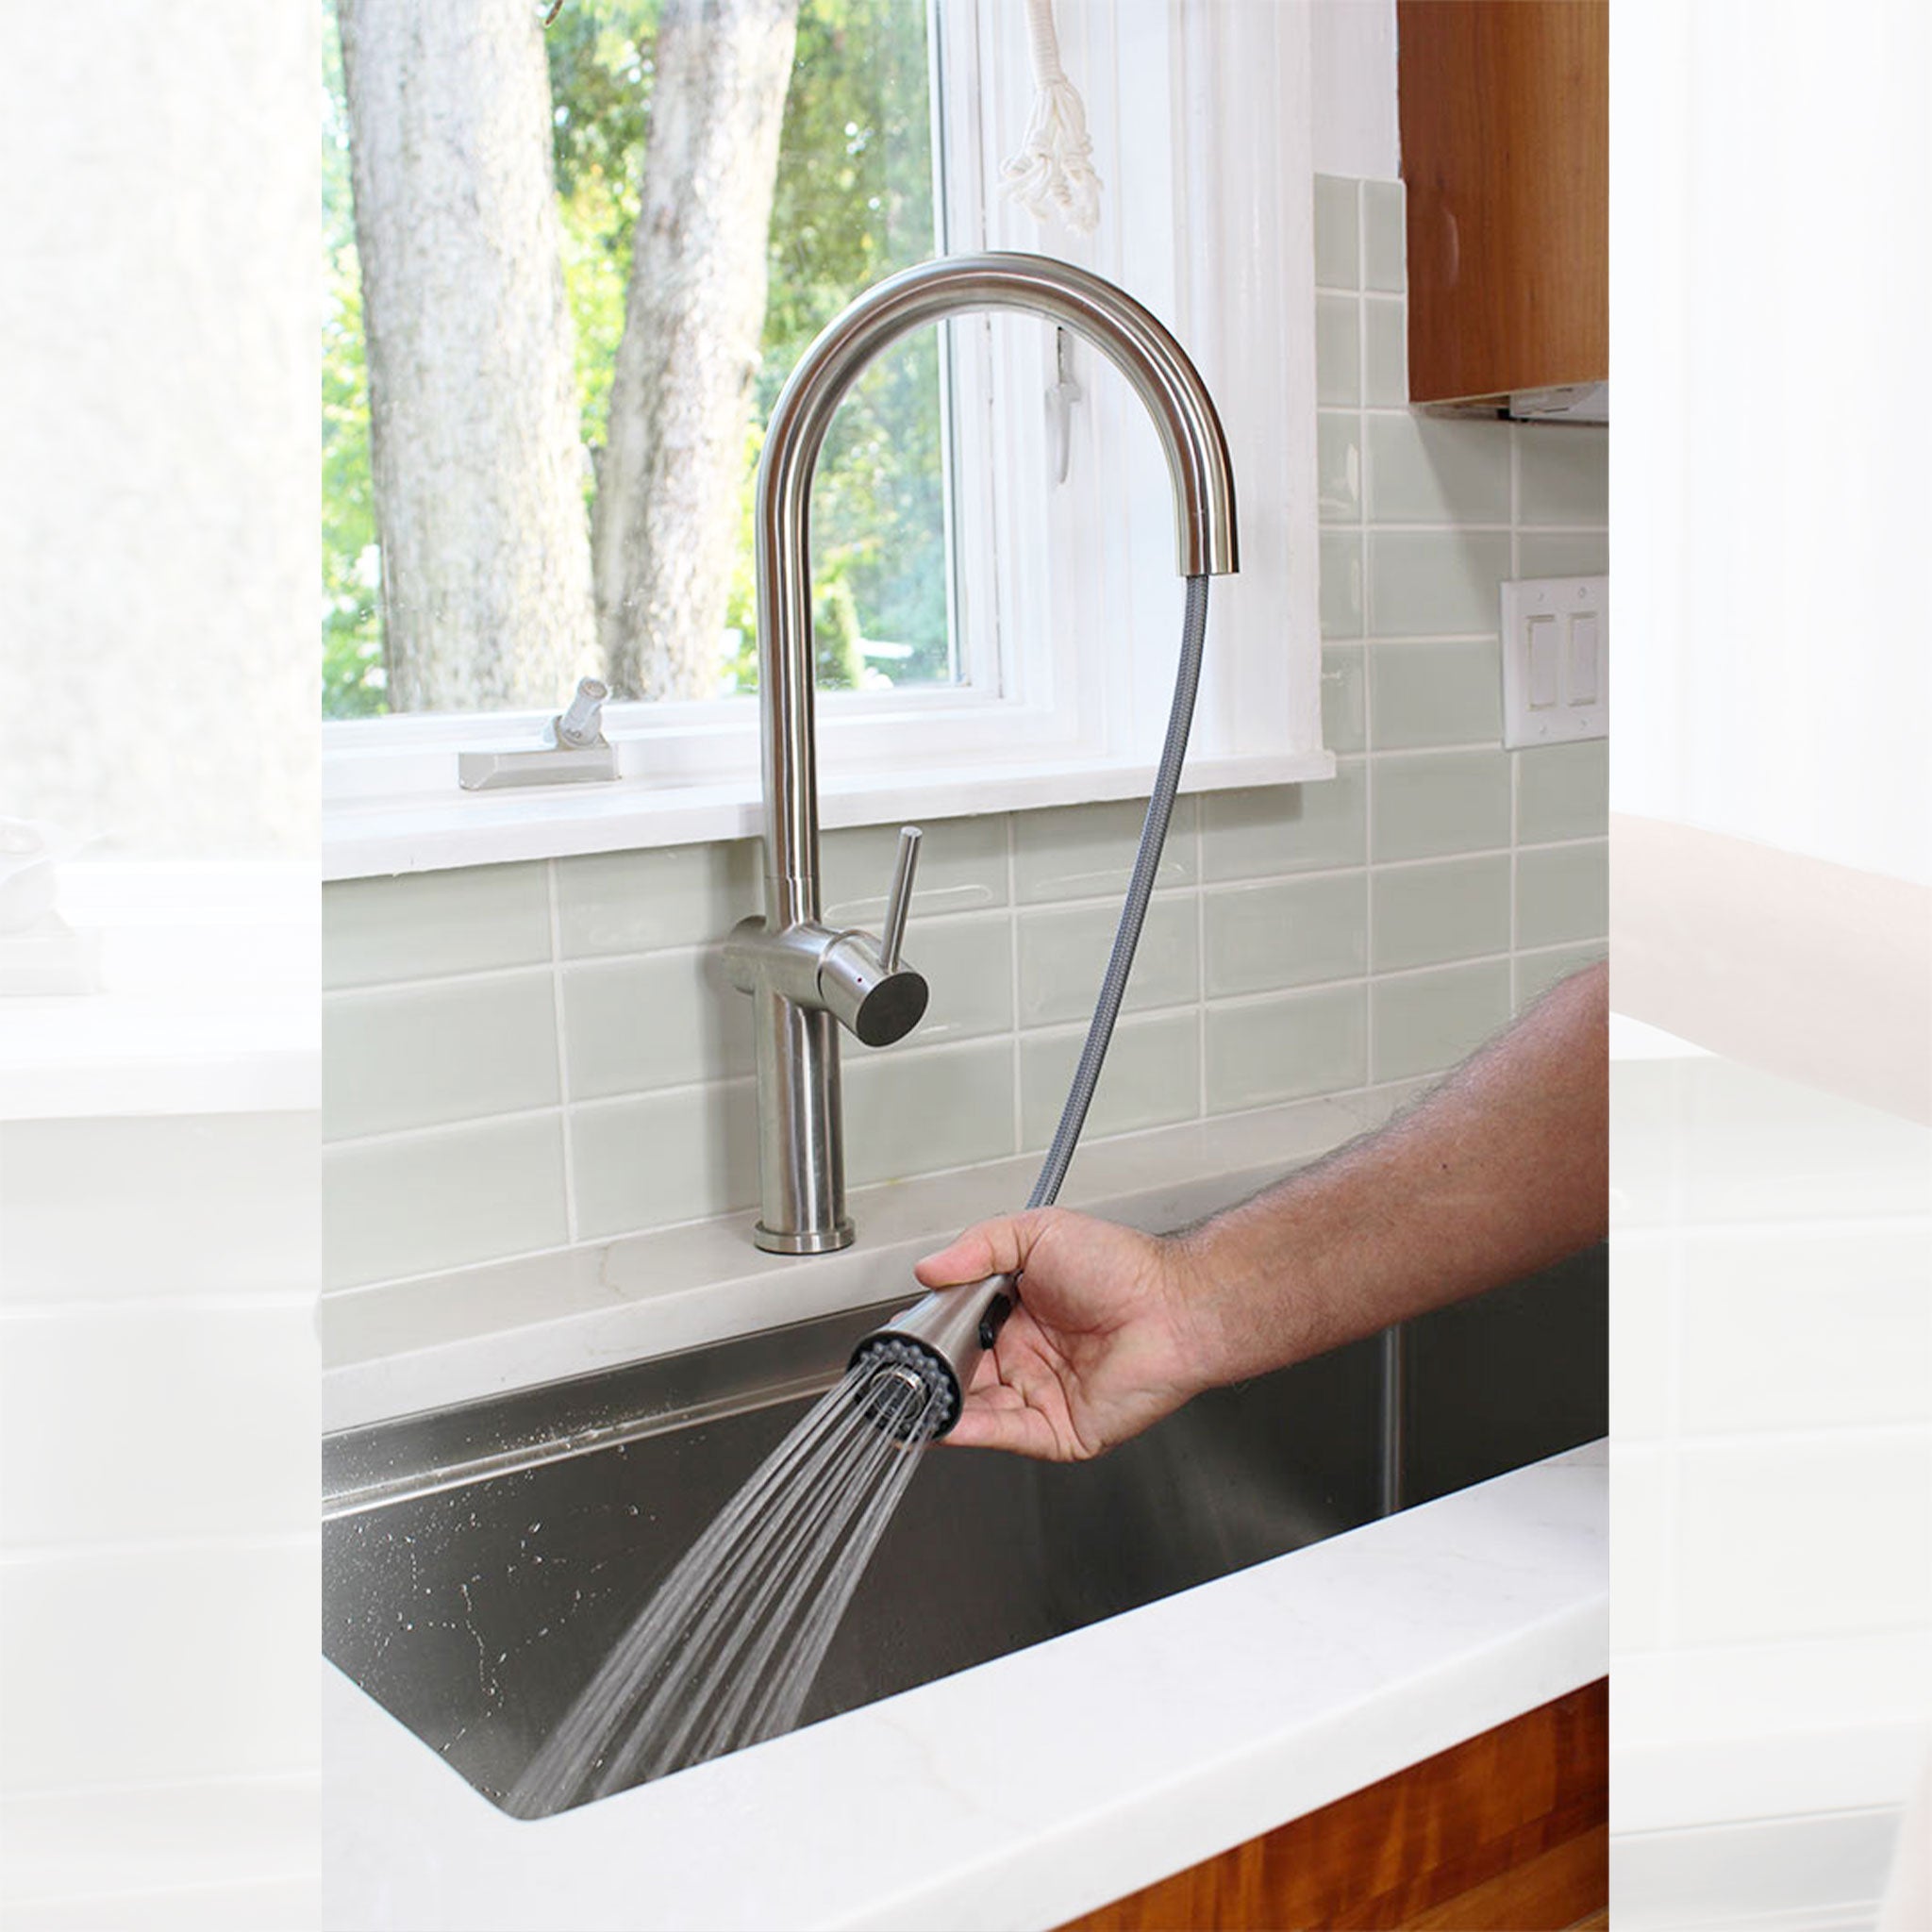 Bella Kitchen Faucet from Create Good Sinks